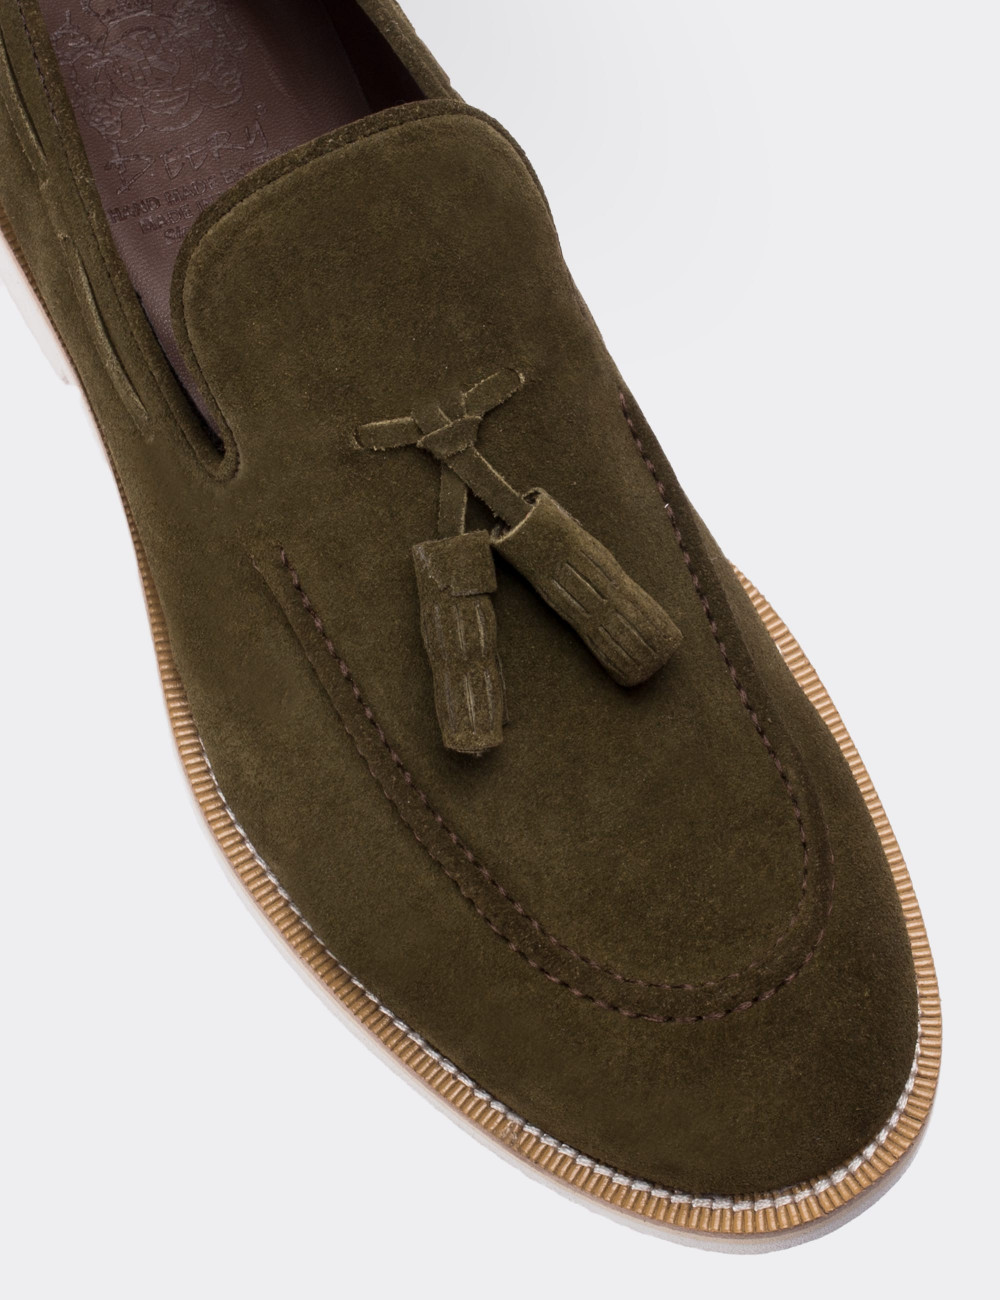 Green Suede Leather Loafers Shoes - 01319MYSLE03